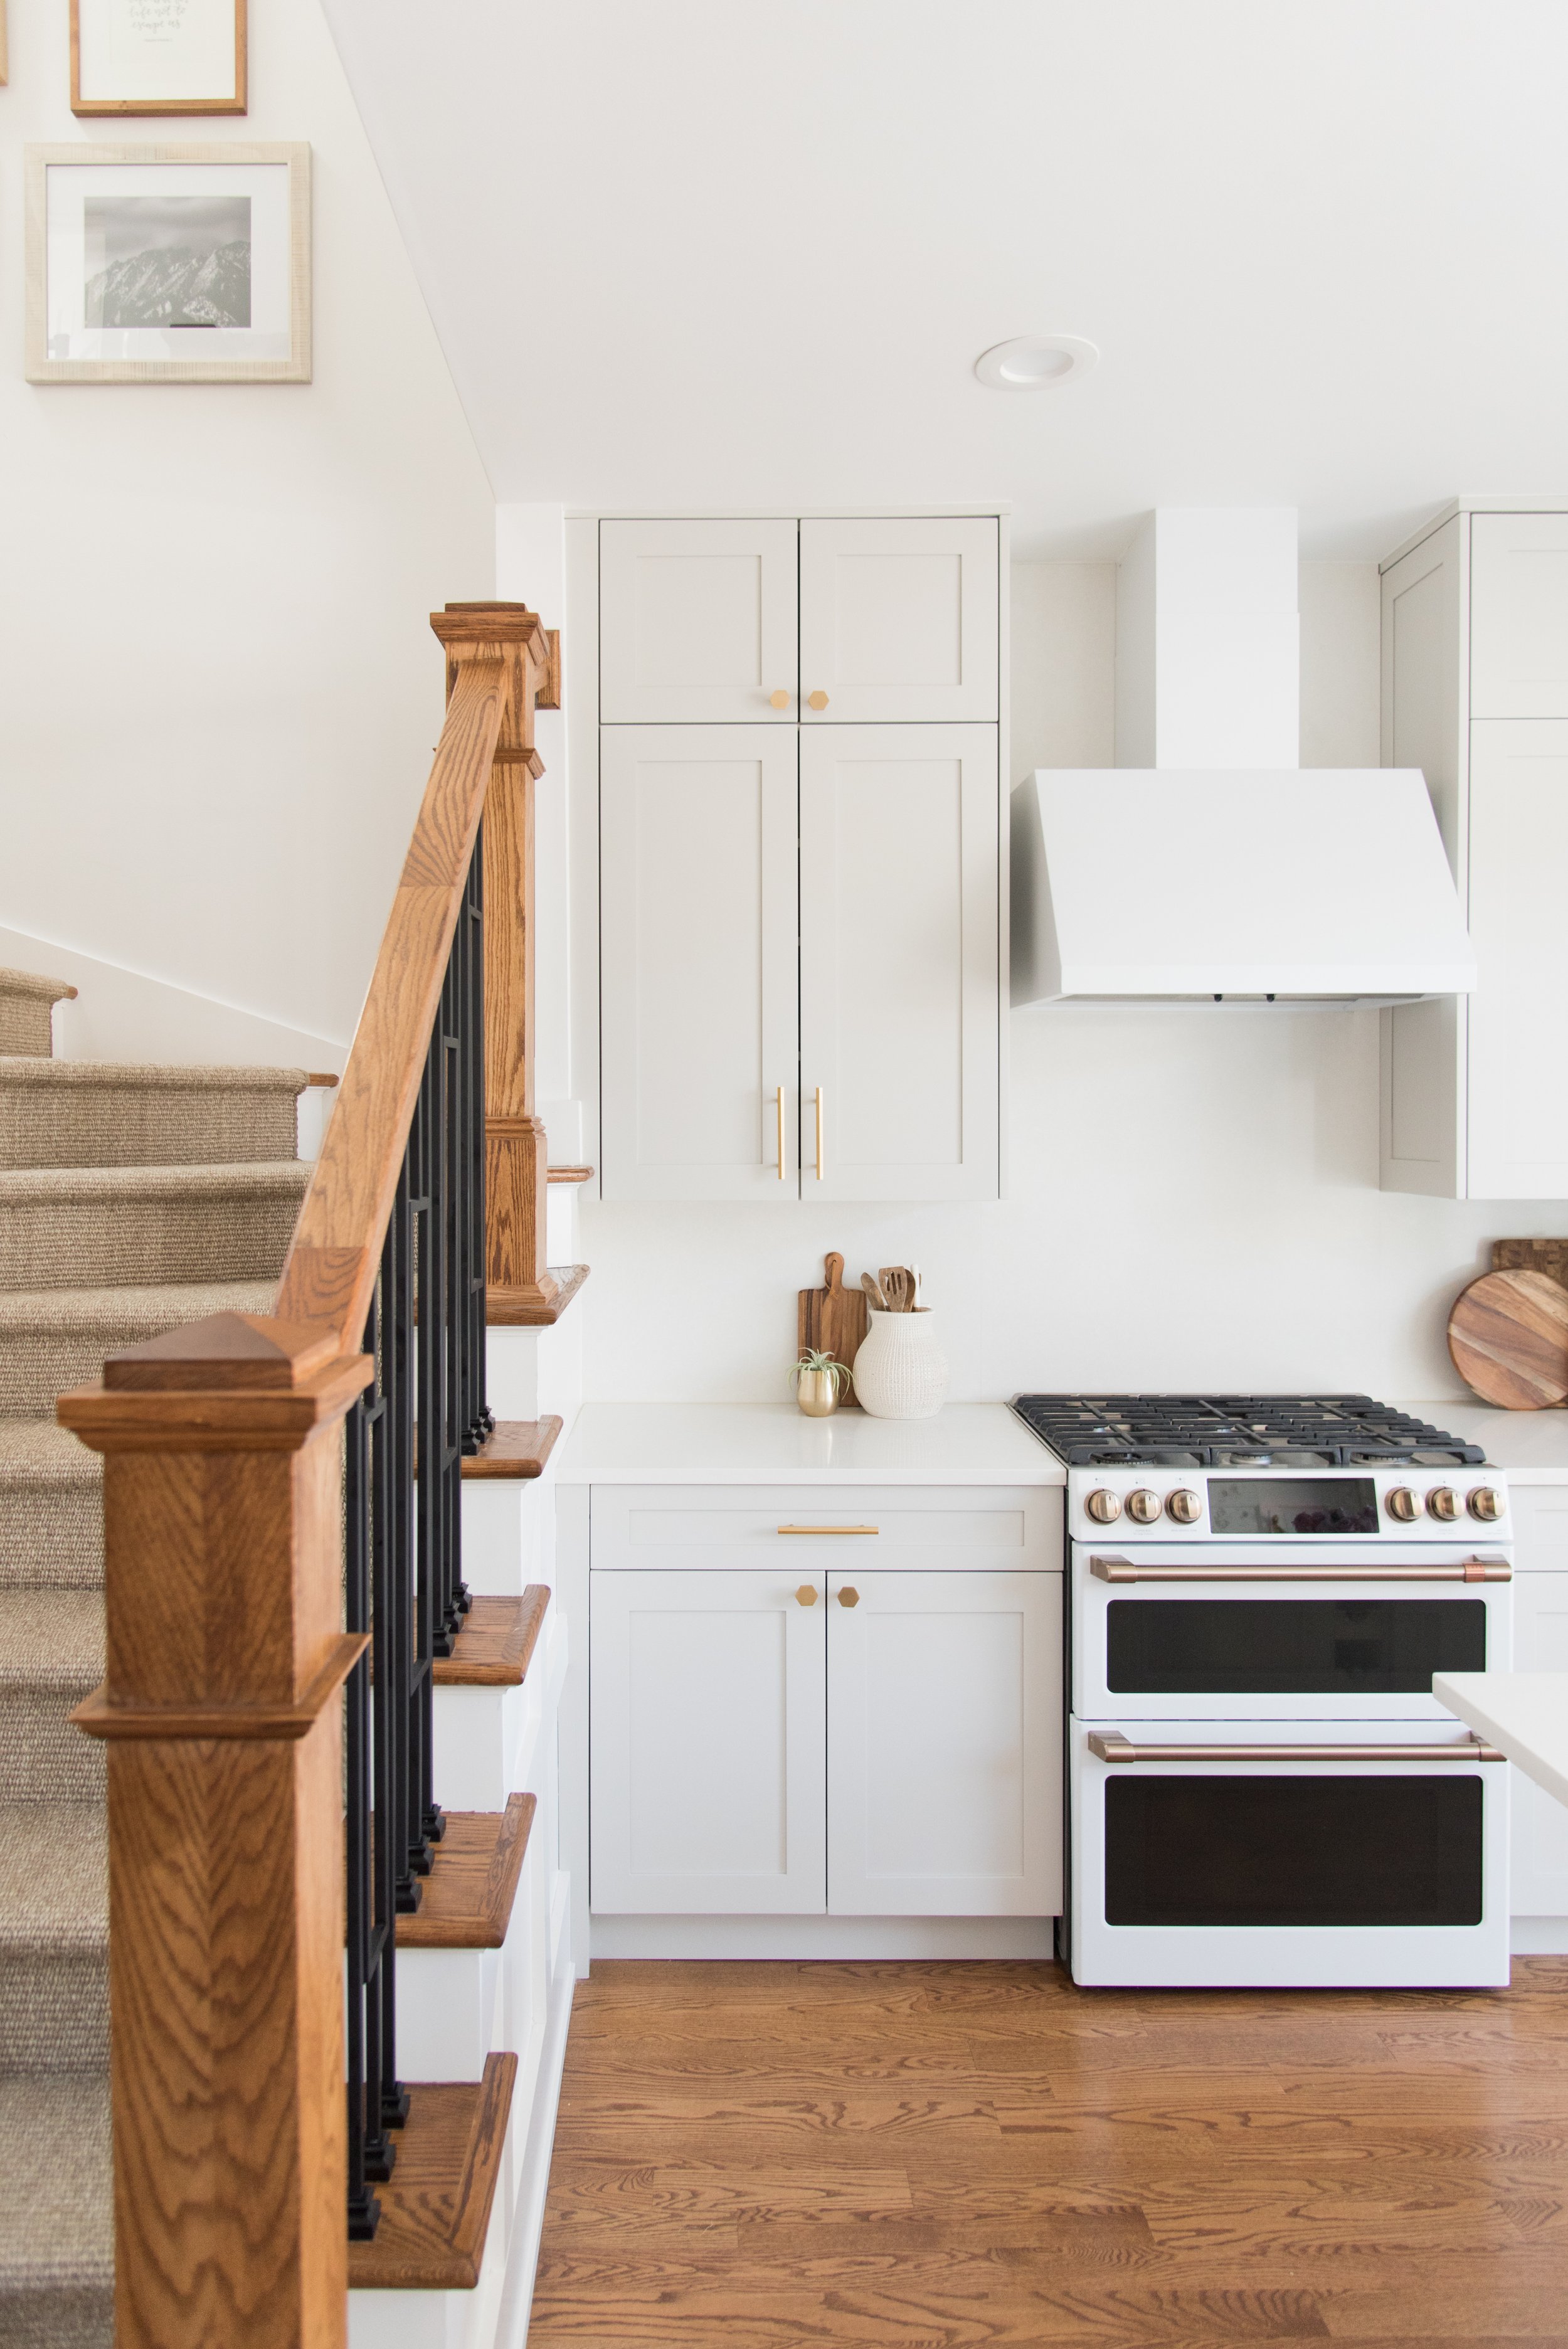 A Kitchen Remodel Cost with Greige Cabinets